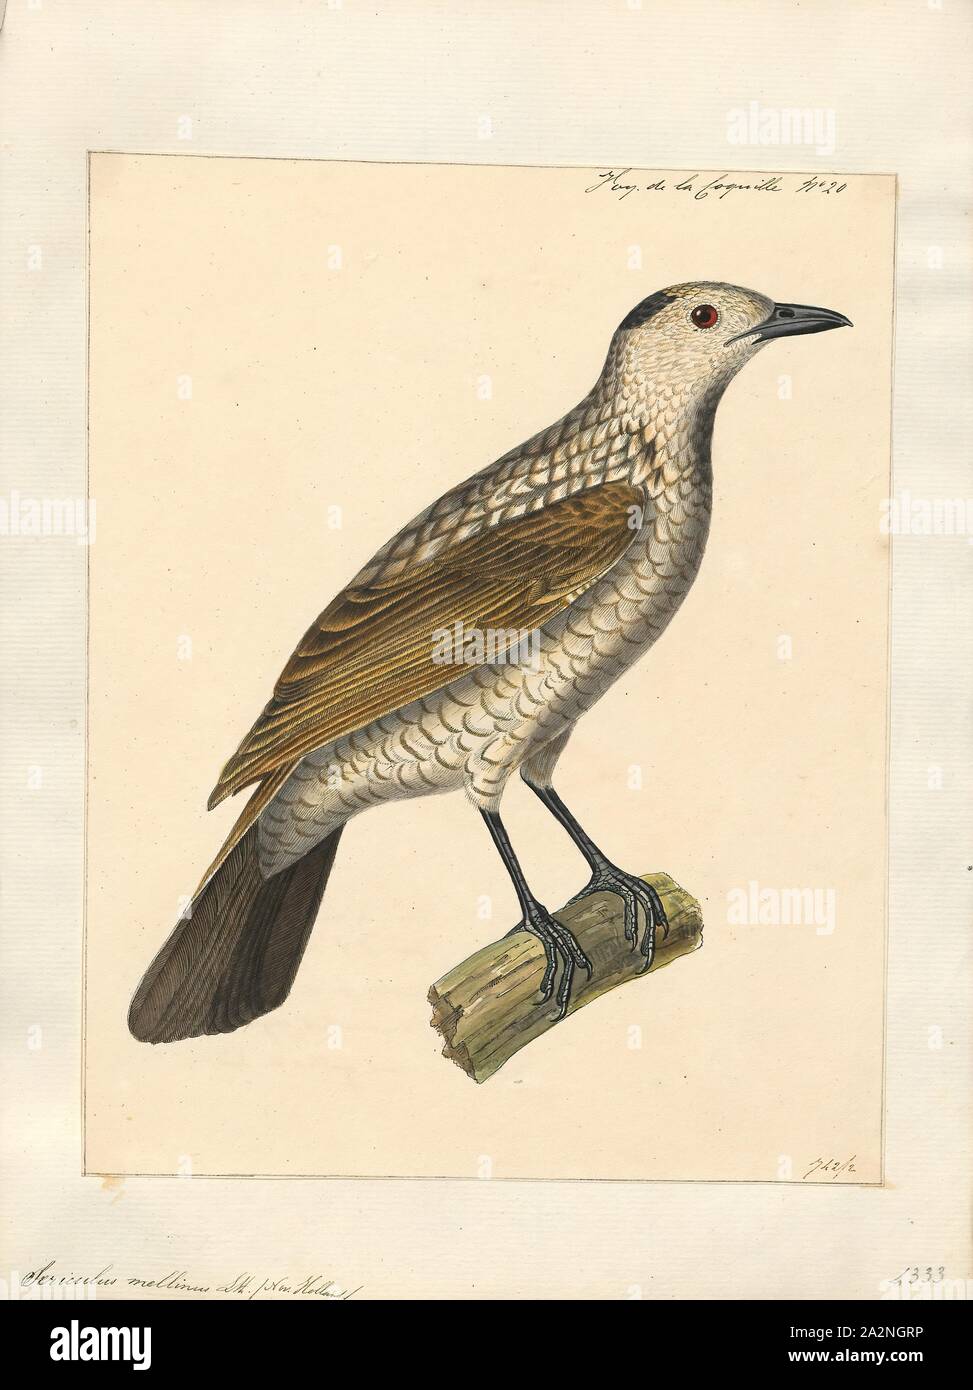 Sericulus melinus, Print, The genus Sericulus of the family Ptilonorhynchidae consists of three spectacularly colored bowerbirds., 1825-1838 Stock Photo